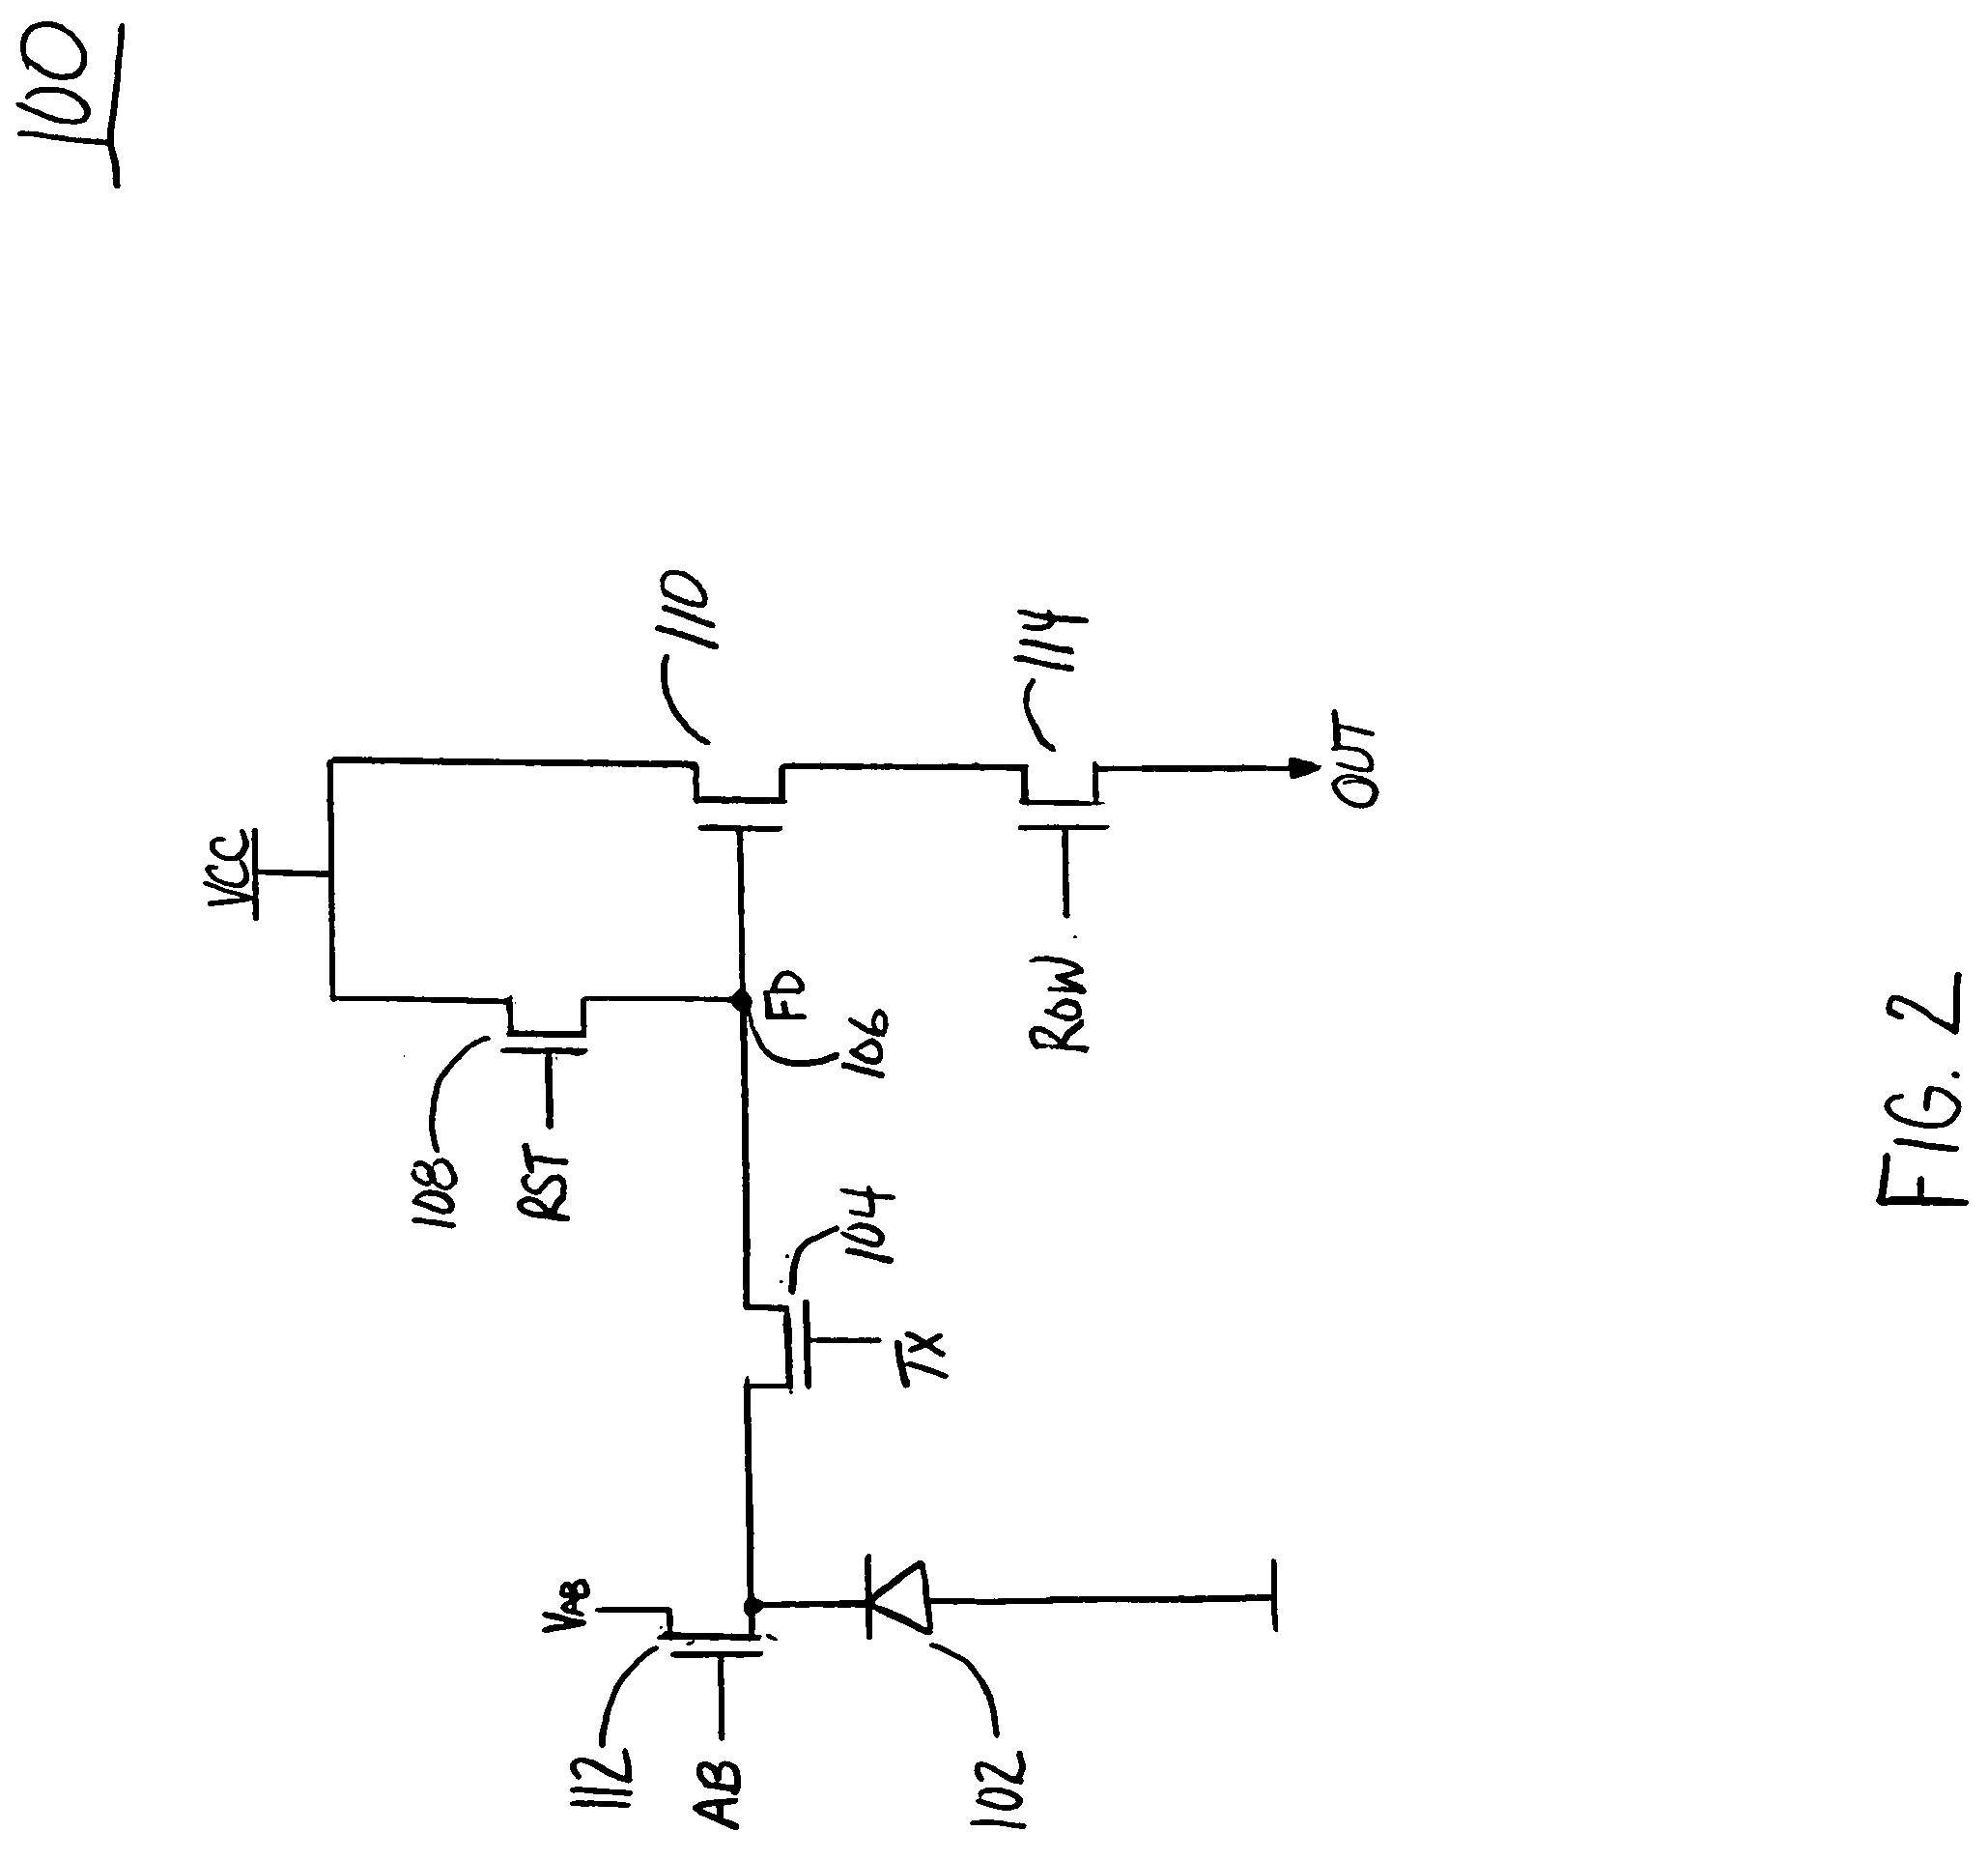 Jfet charge control device for an imager pixel